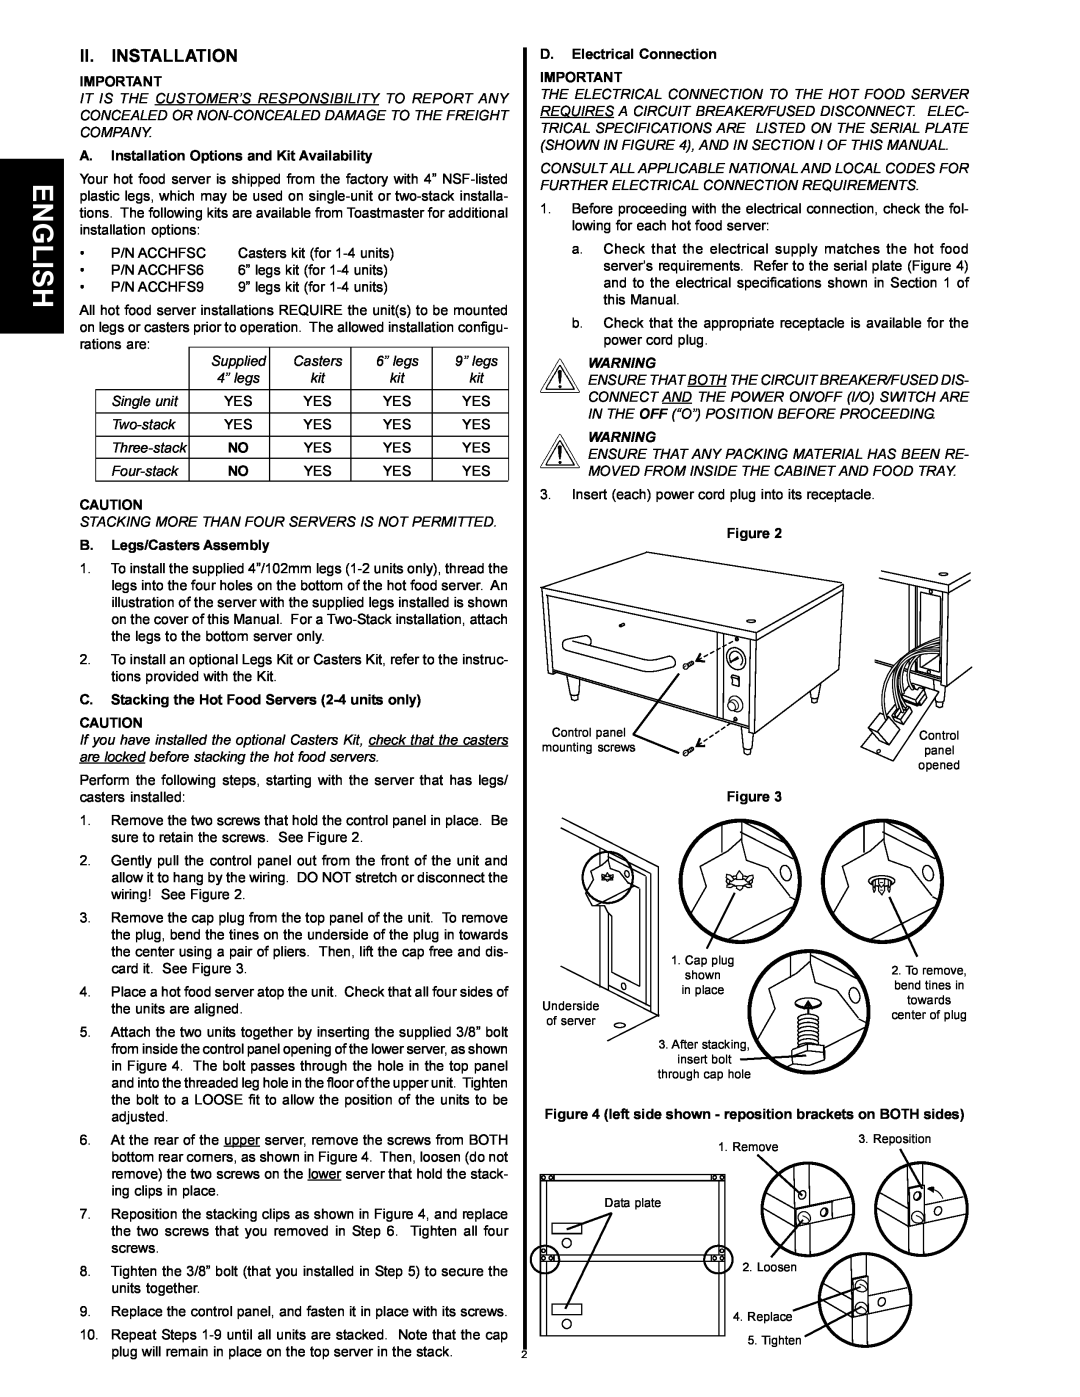 Toastmaster HFS72, HFS09 English, Ii. Installation, A.Installation Options and Kit Availability, B.Legs/Casters Assembly 